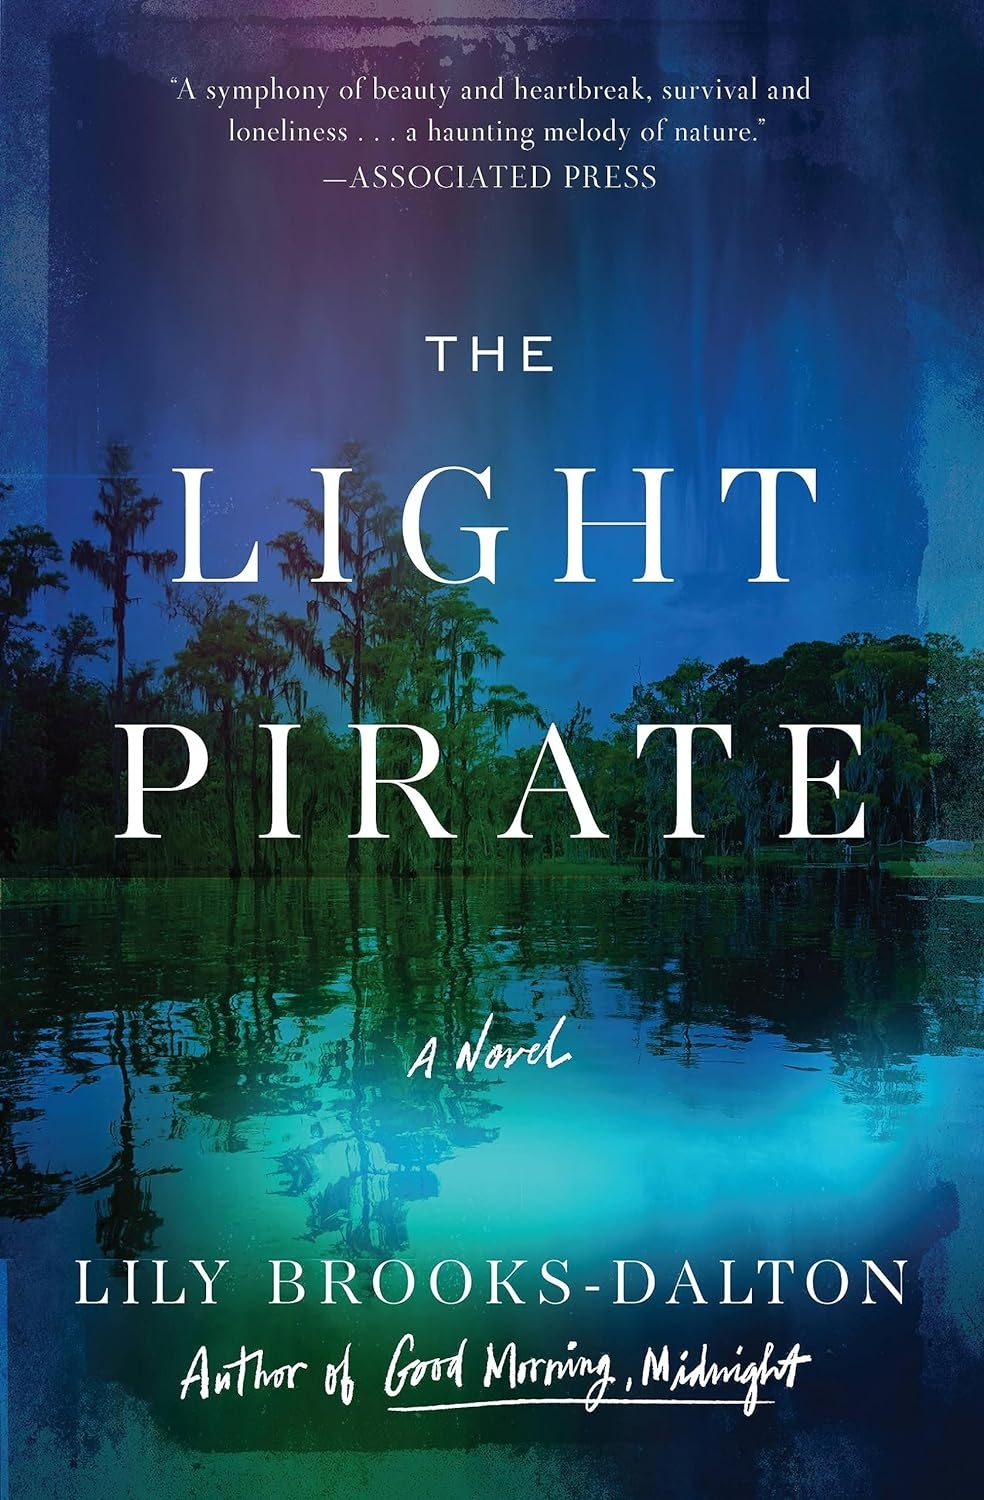 The Light Pirate: GMA Book Club Selection